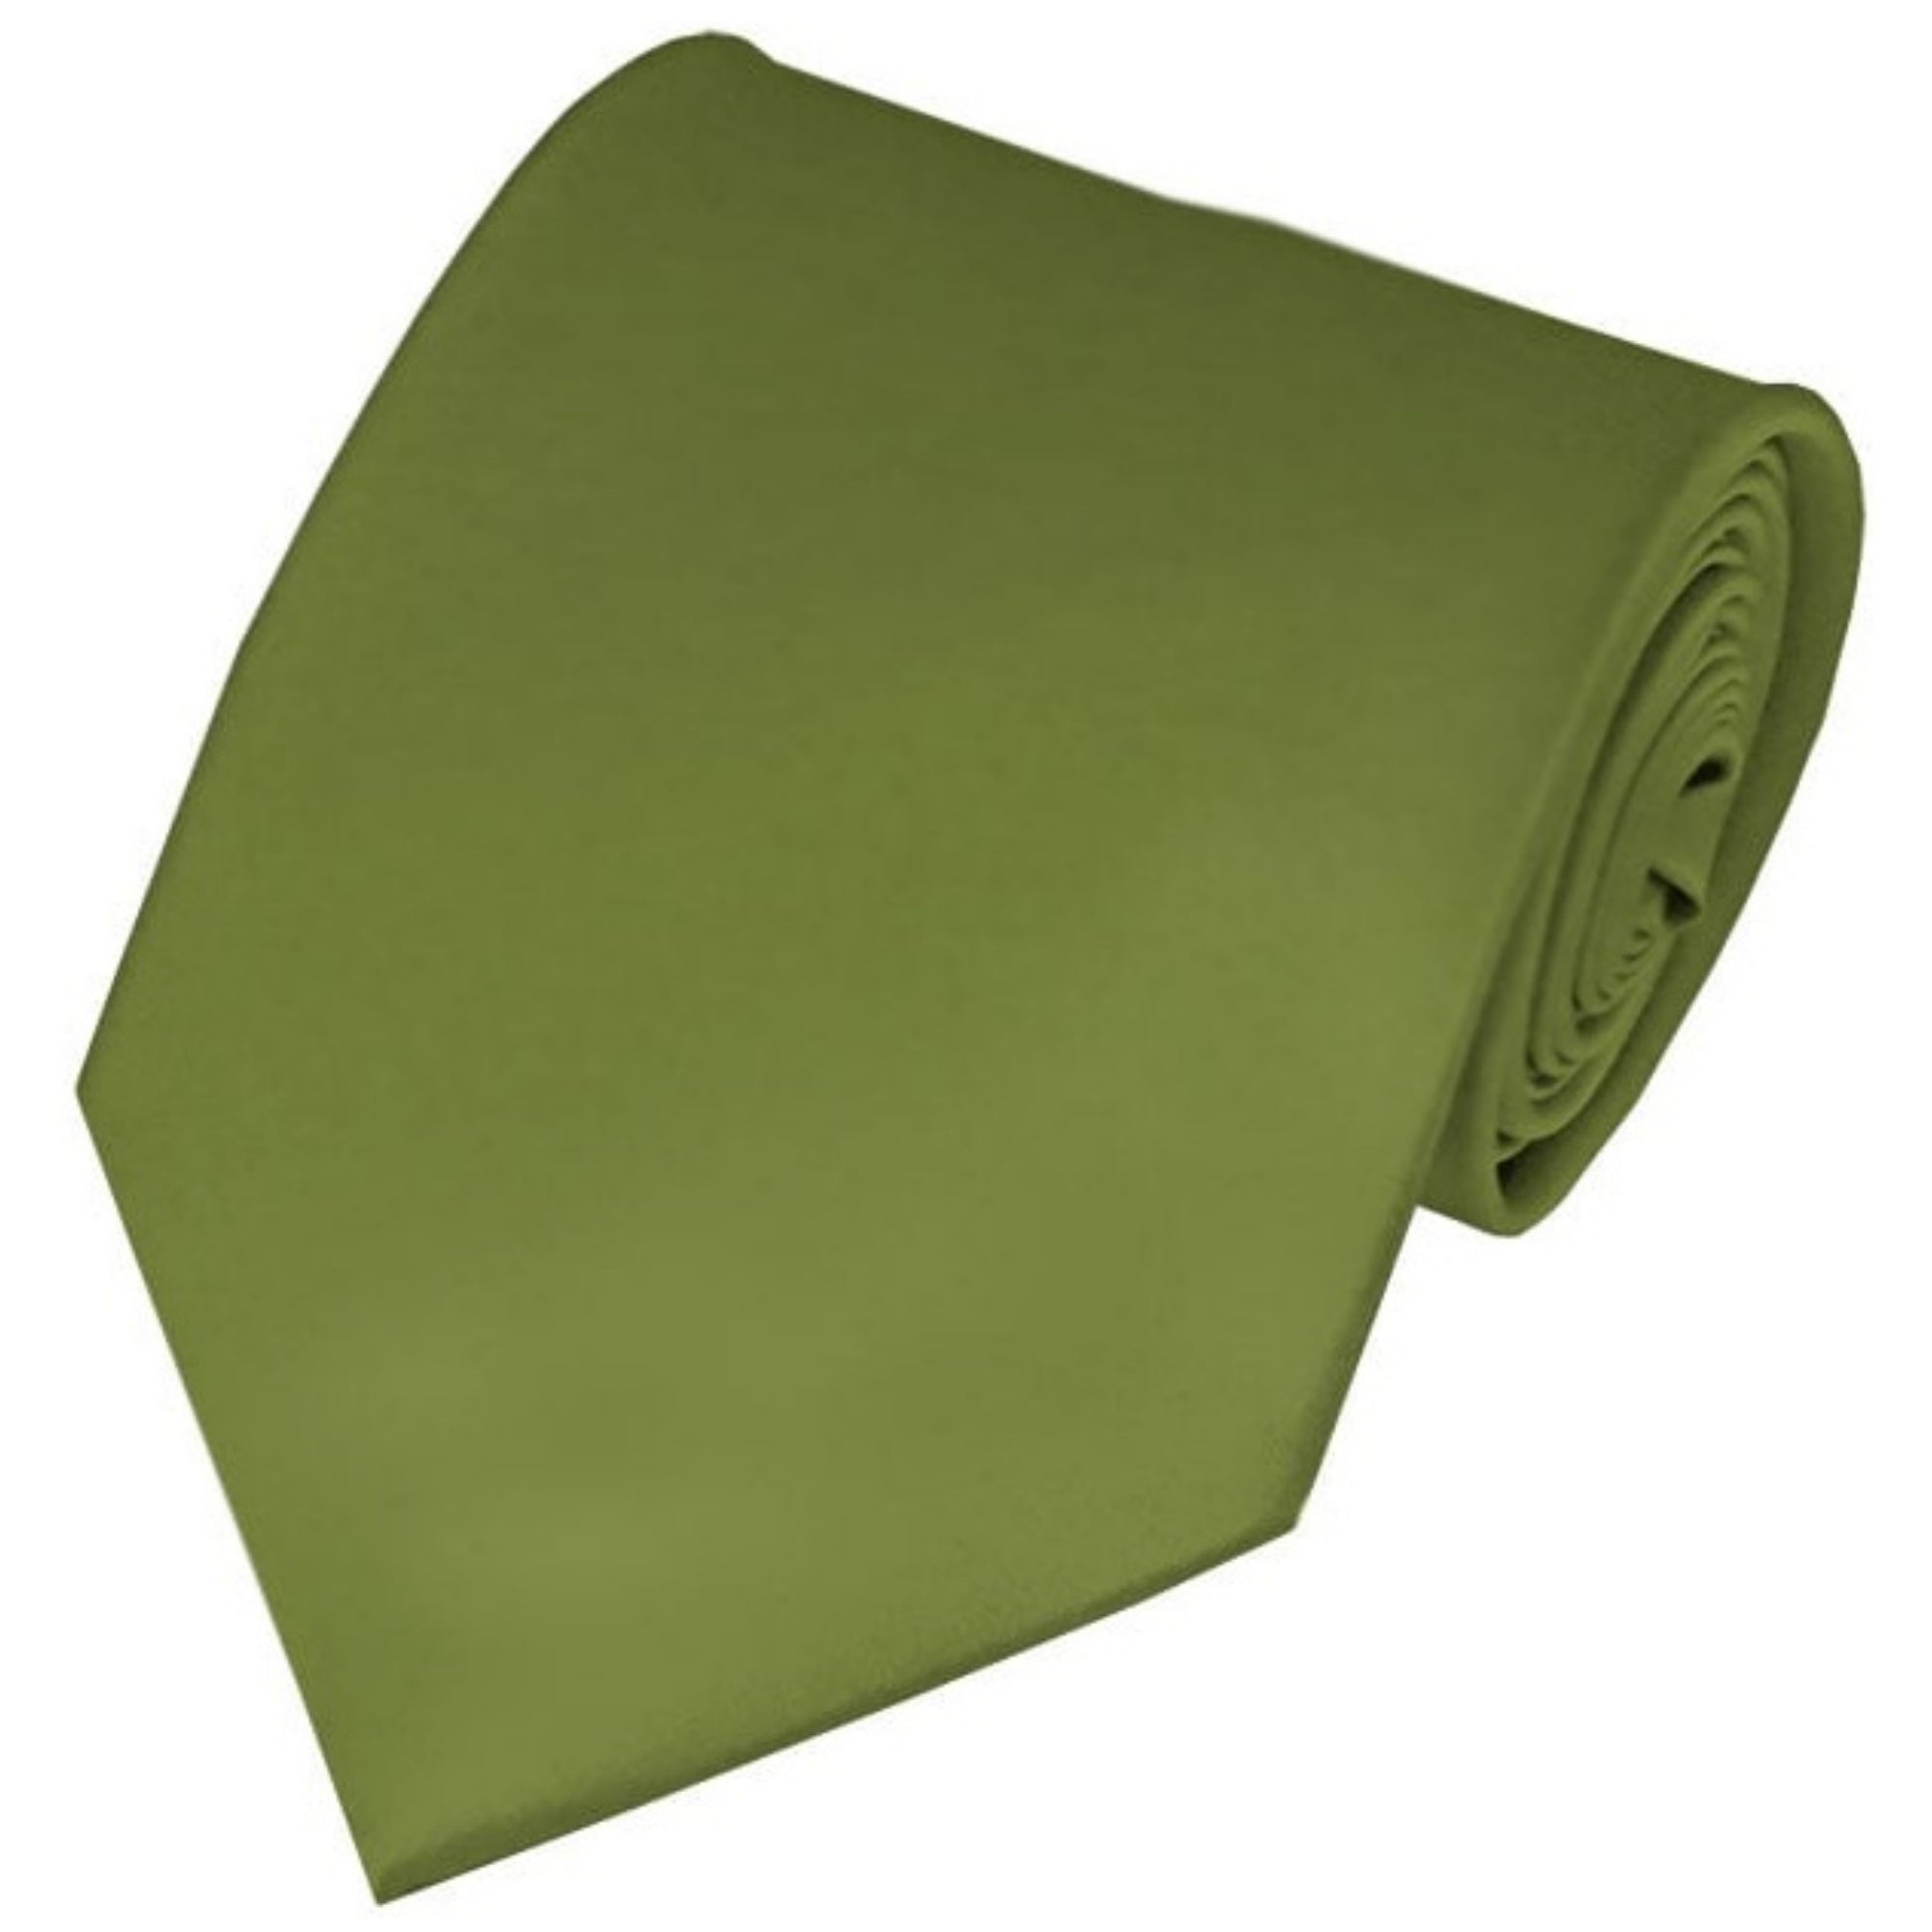 TheDapperTie Solid Color 3.5 Inch Wide And 62 Inch Extra Long Necktie For Big & Tall Men Neck Tie TheDapperTie Olive Green  